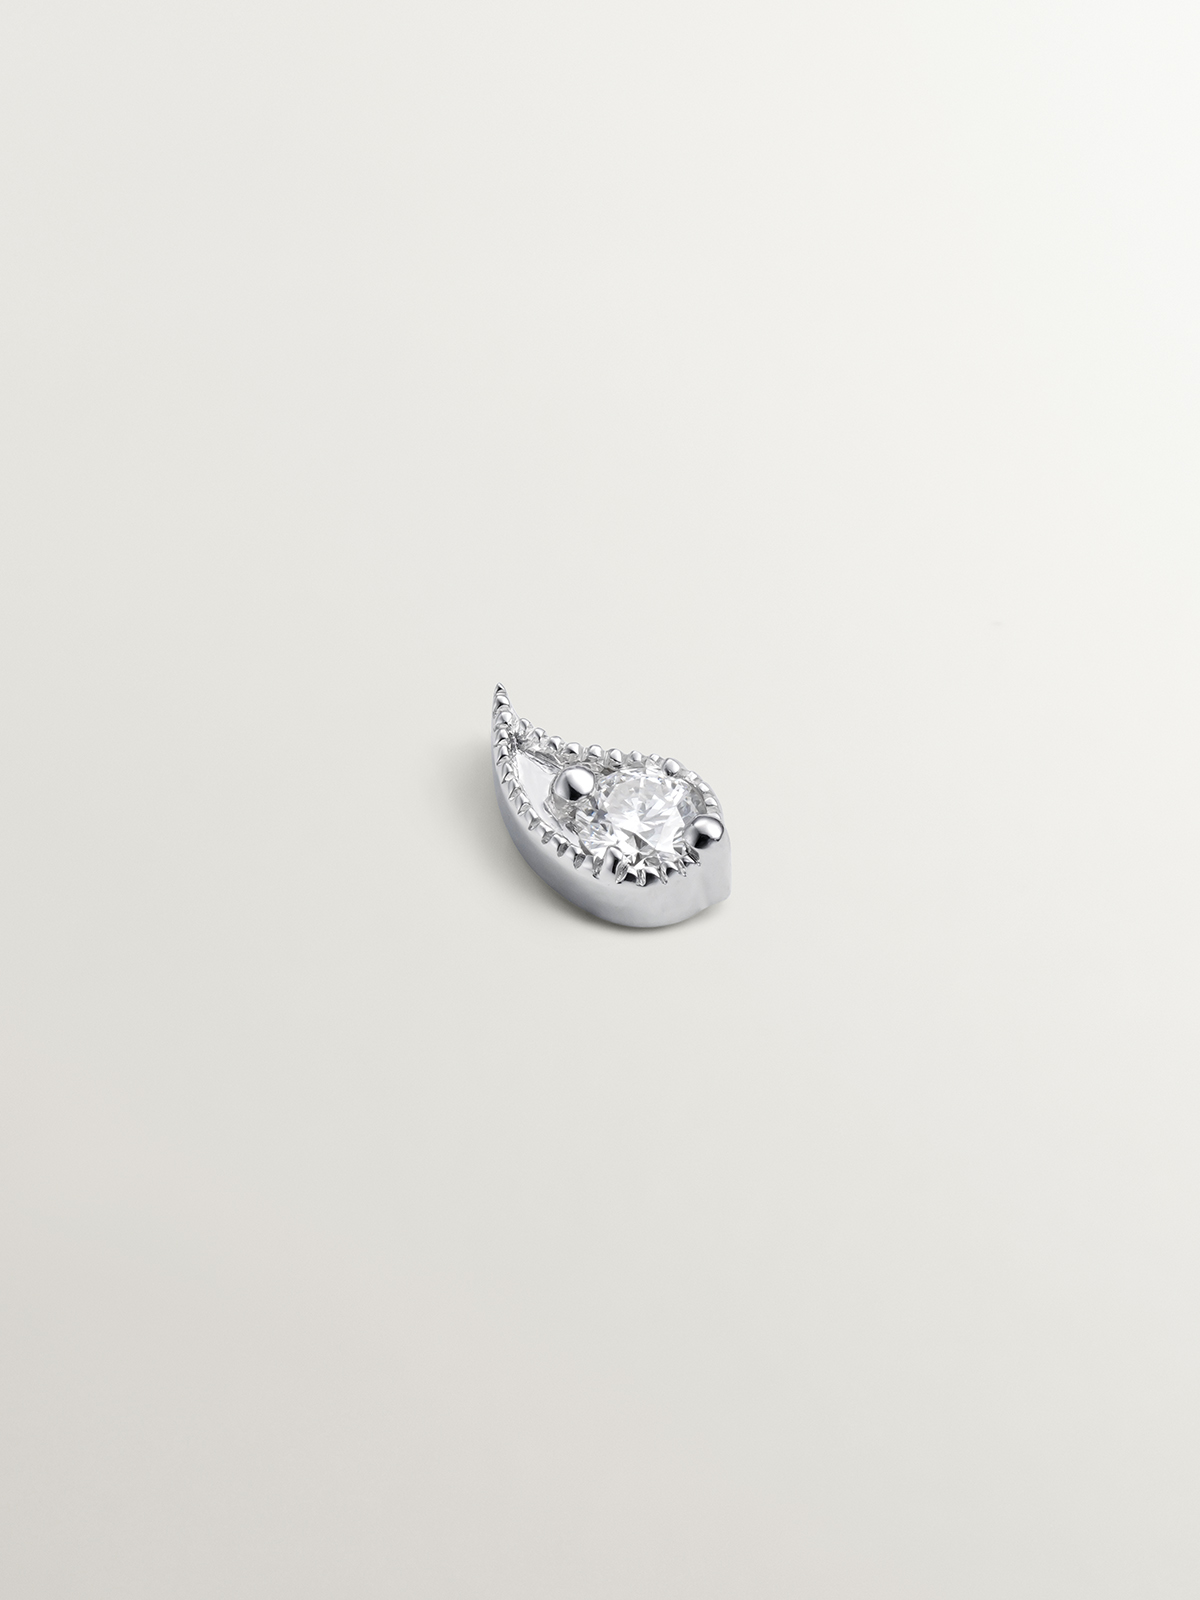 18K white gold piercing with diamonds and teardrop shape.